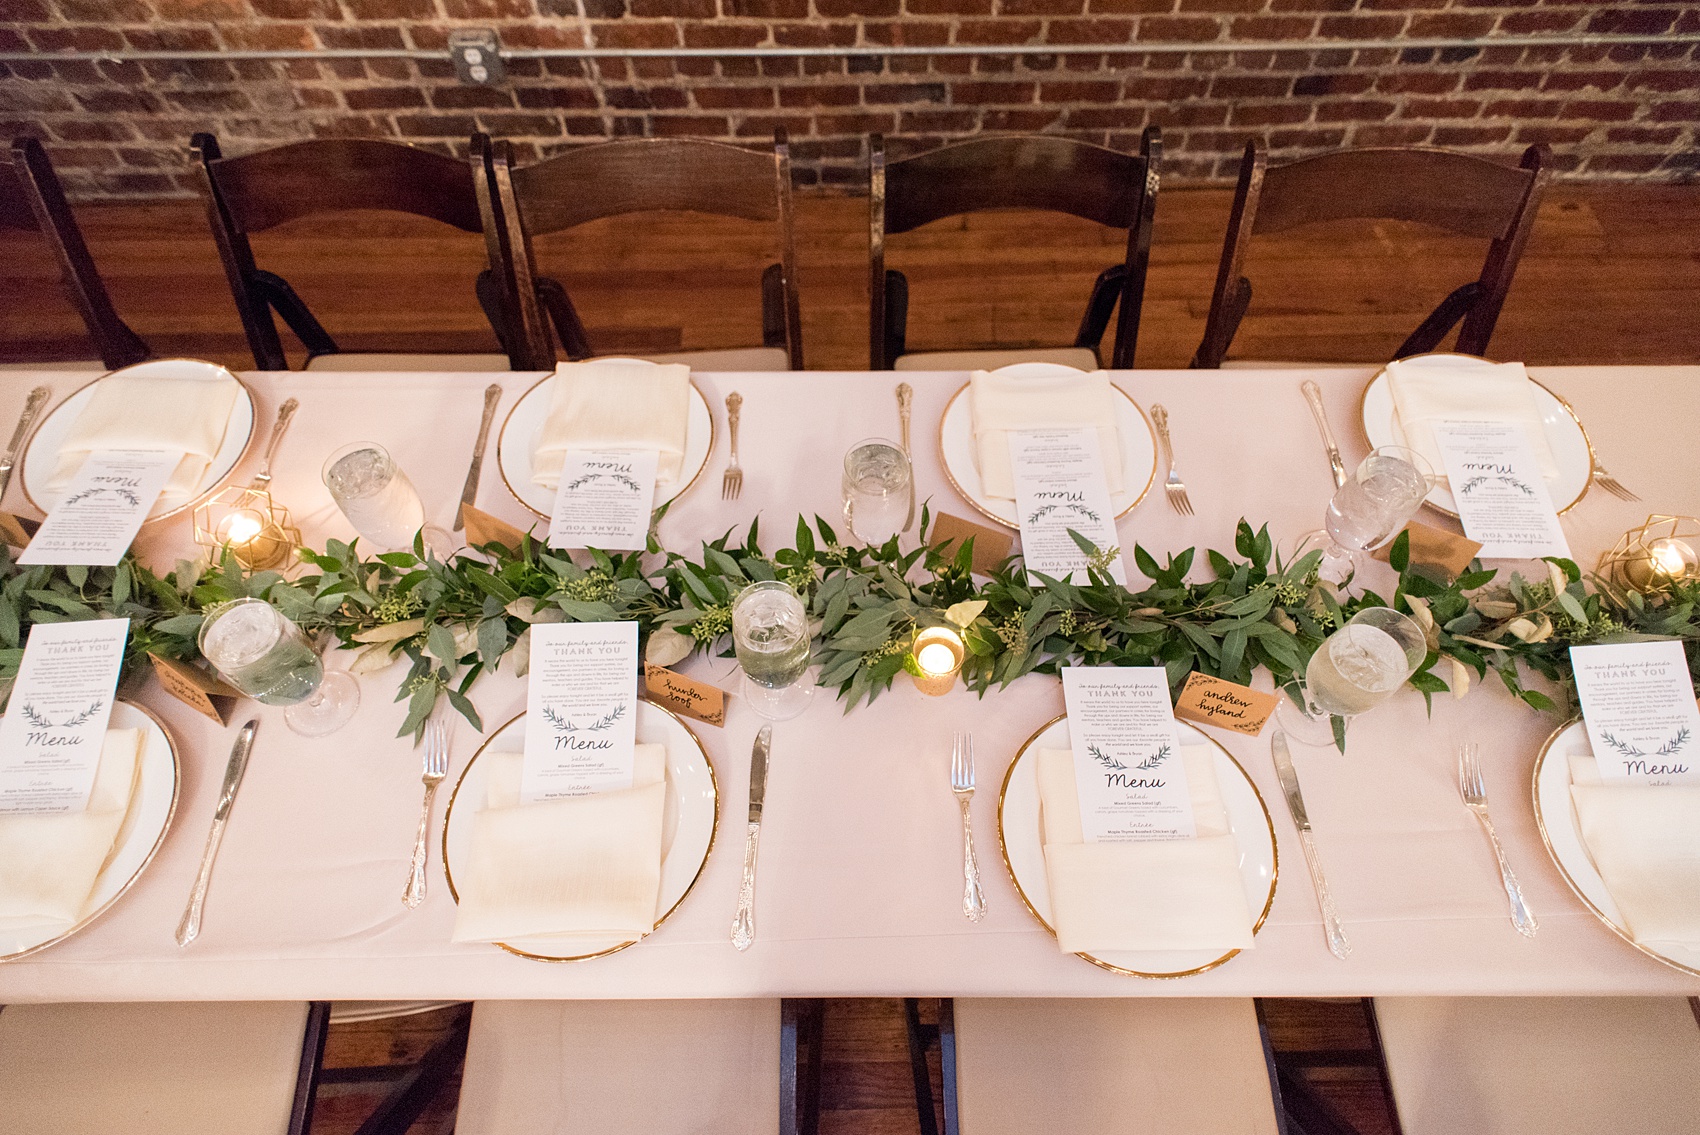 Pictures from a Christmas inspired wedding in downtown Raleigh, North Carolina by Mikkel Paige Photography. The bride and groom had a reception at the rustic venue, The Stockroom at 230, with pink linens, candlelight and greenery details. Click through for more ideas from their beautiful celebration with a pink and gold palette! #mikkelpaige #raleighweddingphotographer #downtownRaleigh #holidaywedding #ChristmasWedding #headtabledetails